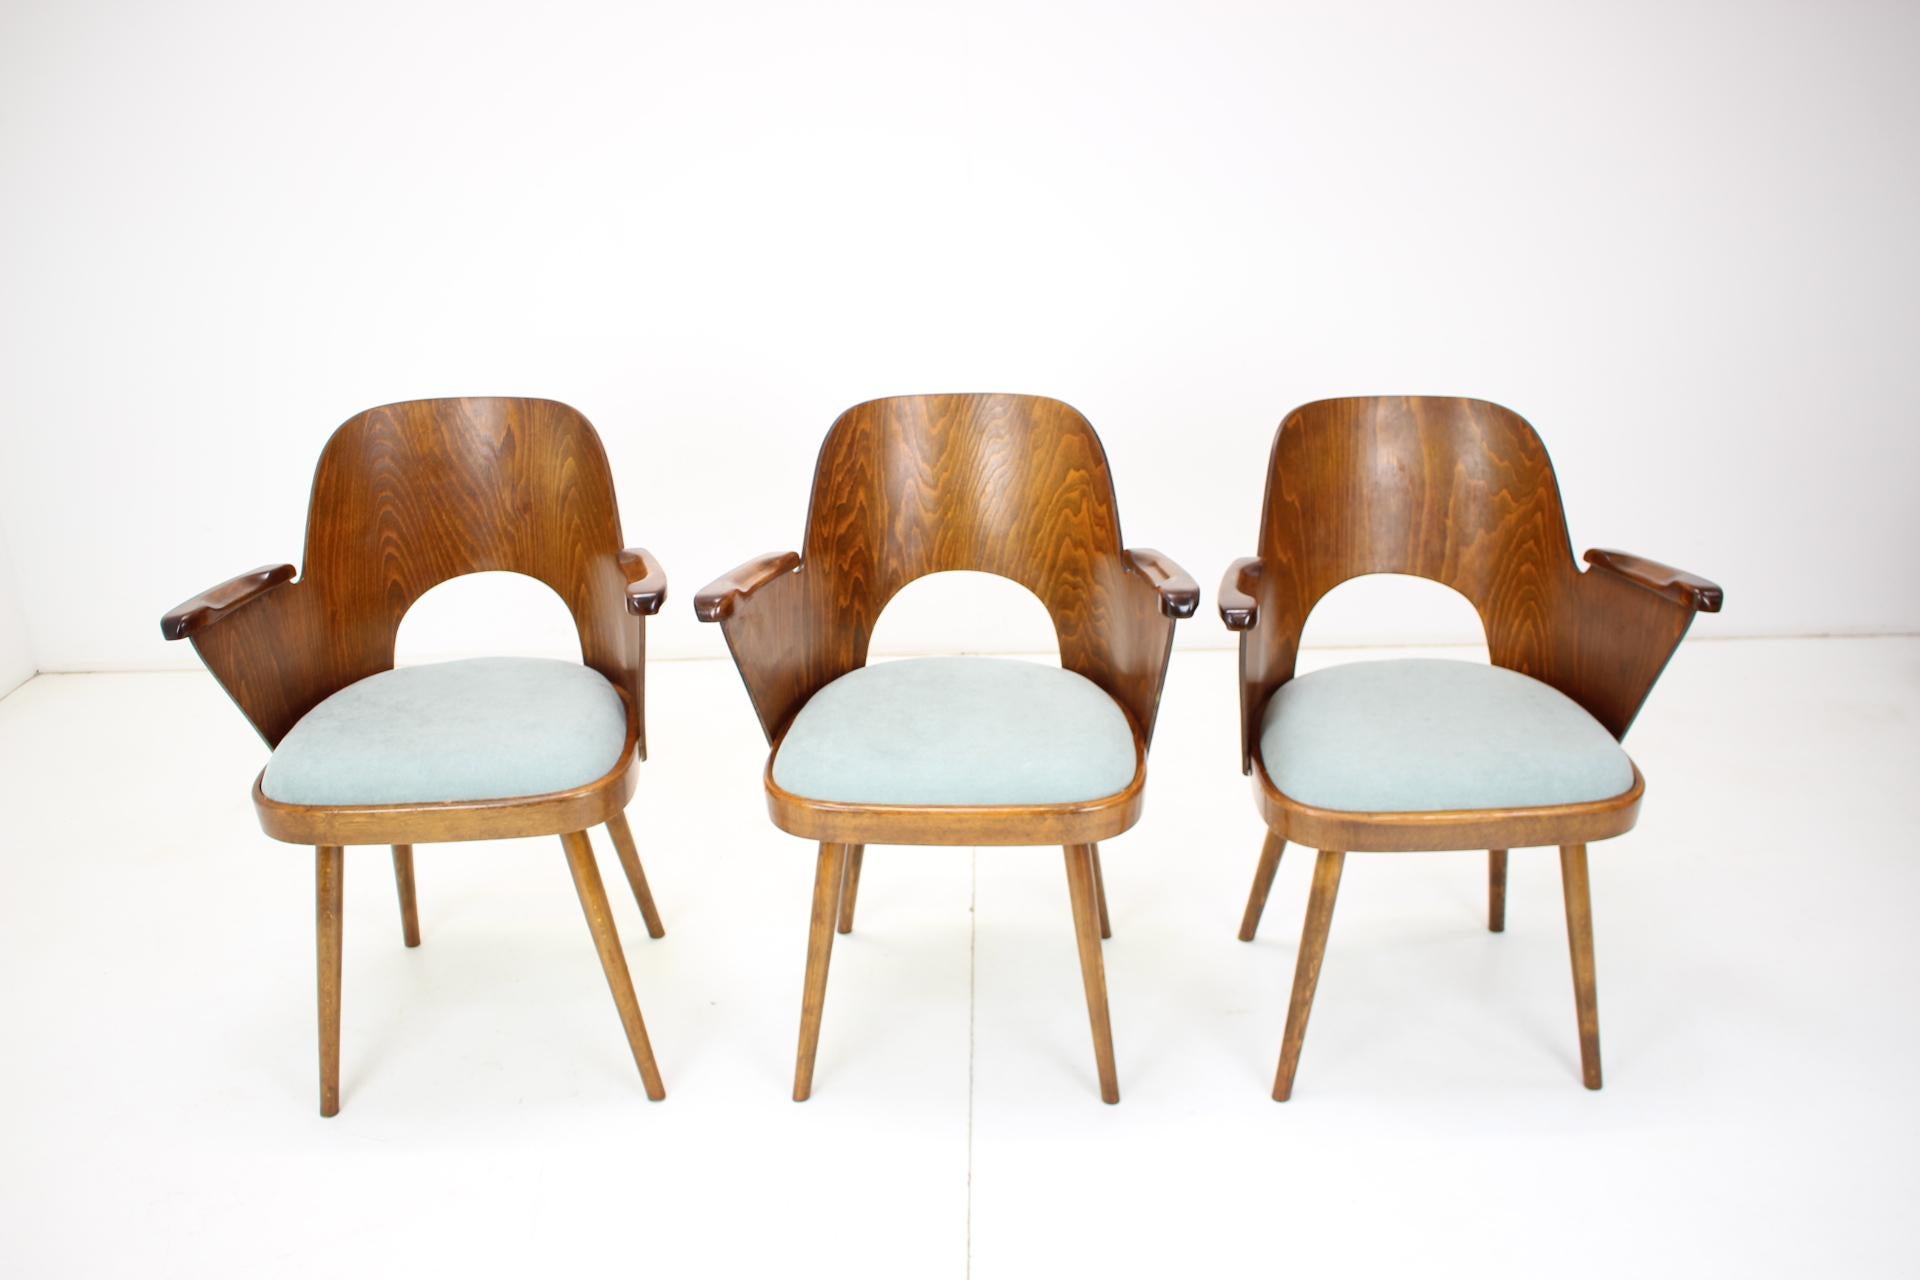 -Good original condition
-Each chair has a different height
-Dimensions from the left in cm: depth- width- height- seat height
 46cm 60cm 82cm 50cm
 46cm 60cm 80cm 48cm
 46cm 60cm 79cm 46cm
-Chairs can be adjusted to the same height according